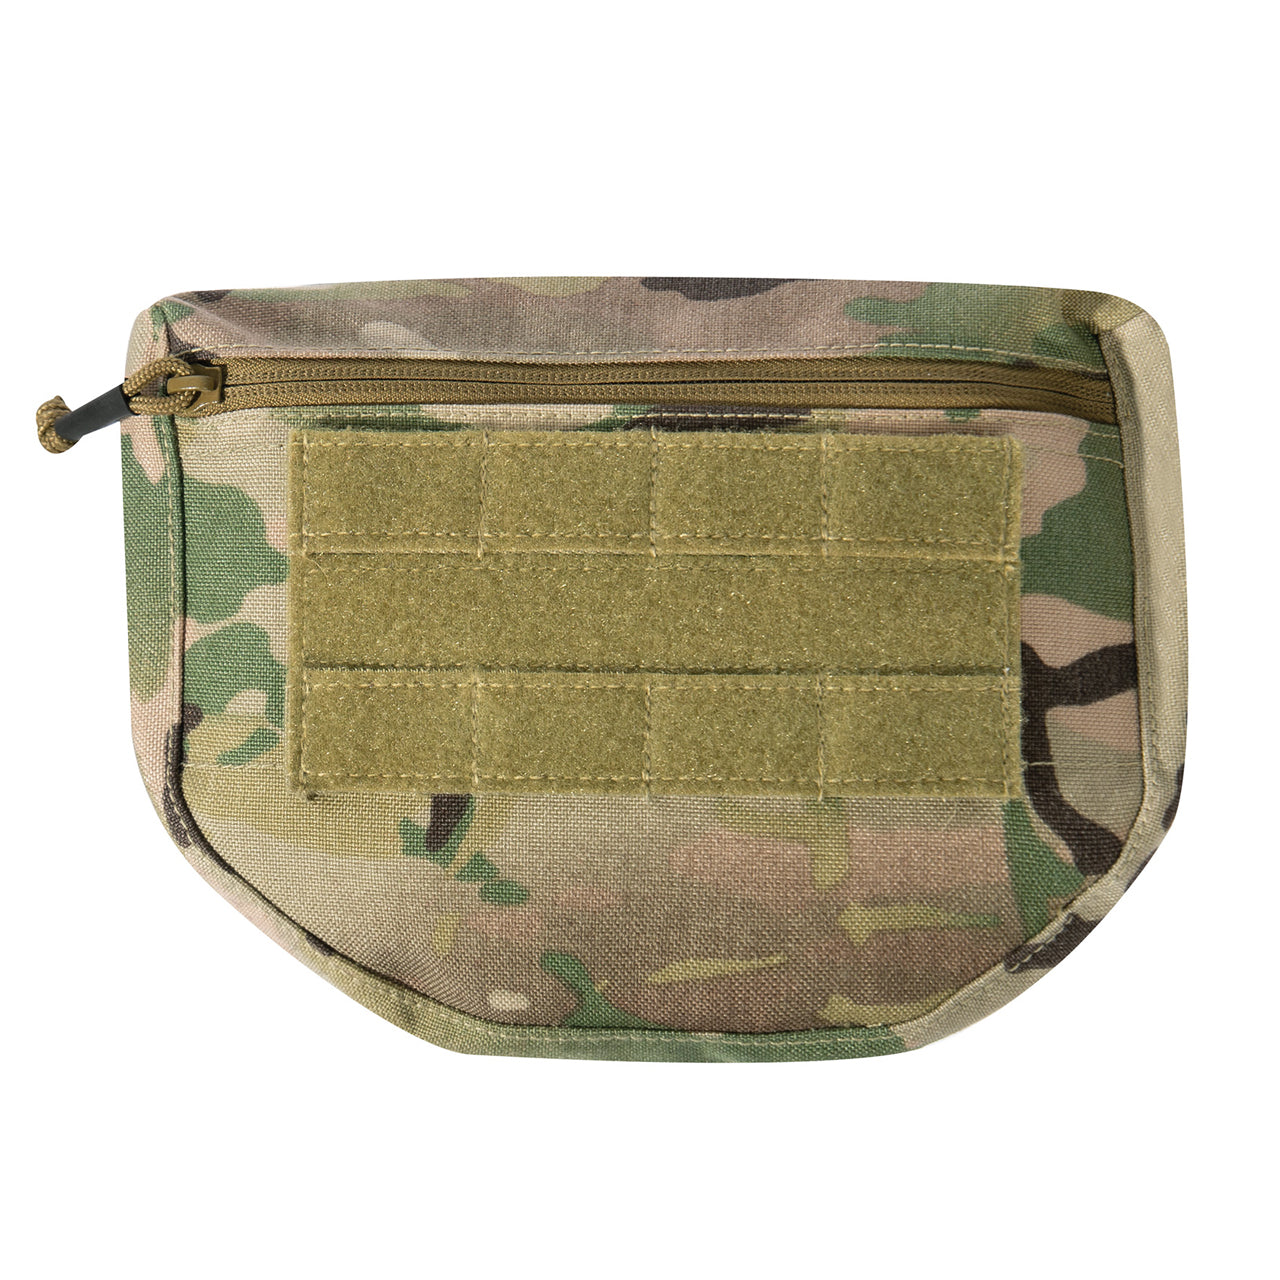 Tactical Pouch Is Designed To Integrate Under The Front Flap Of Most Plate Carrier Vests, Attaching Quickly And Securely Via A Hook And Loop Fastening System Interior Of This Modular Lightweight Load-Carrying Equipment Accessory Features A Row Of Elastic Loops, Perfect For Storing Magazines As Well As A Large Loop Field www.moralepatches.com.au